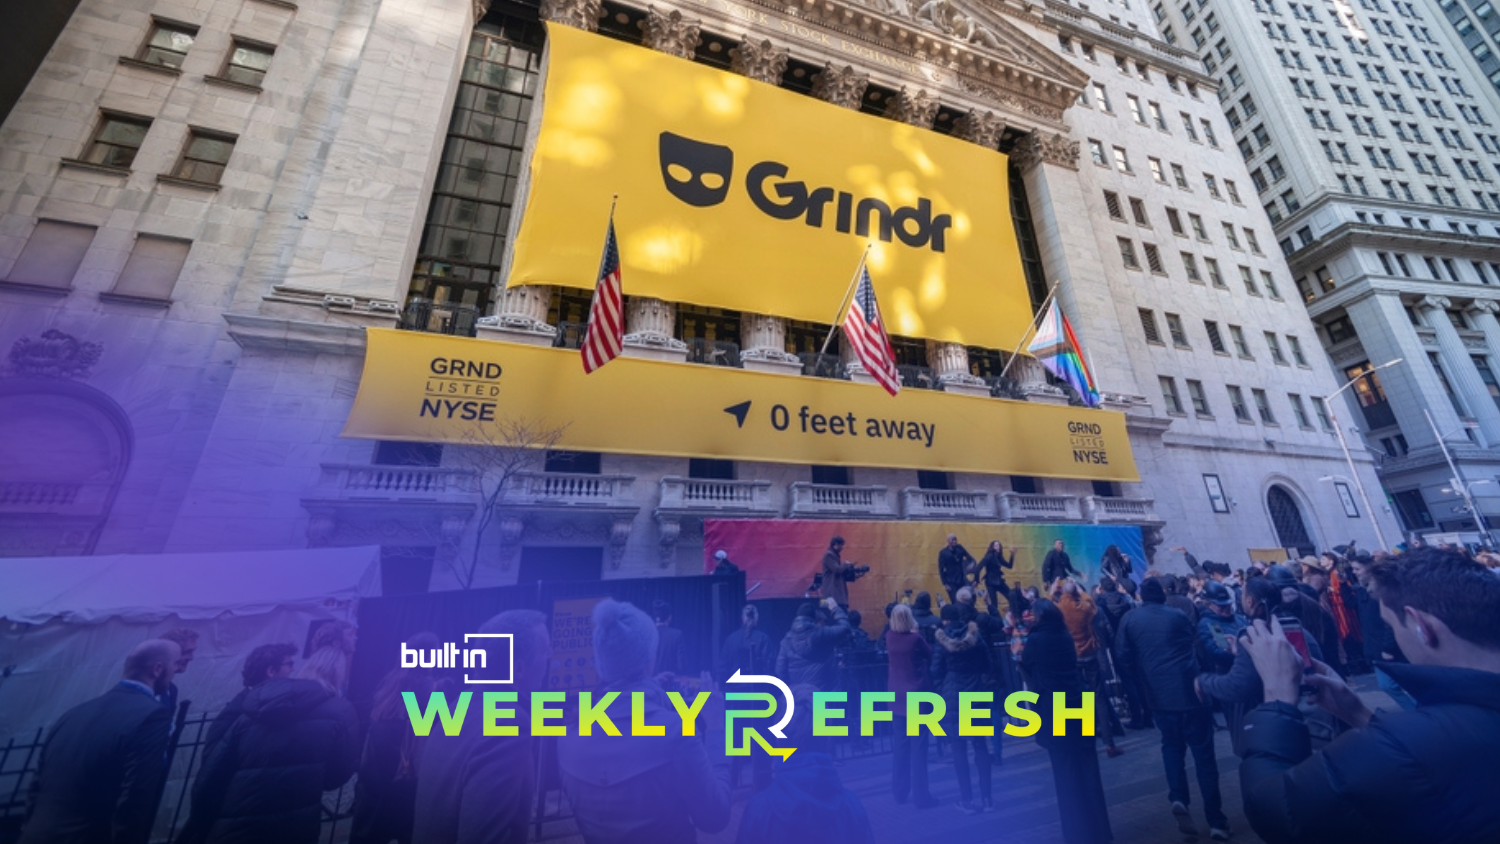 A banner with Grindr’s name and logo on the New York Stock Exchange Building